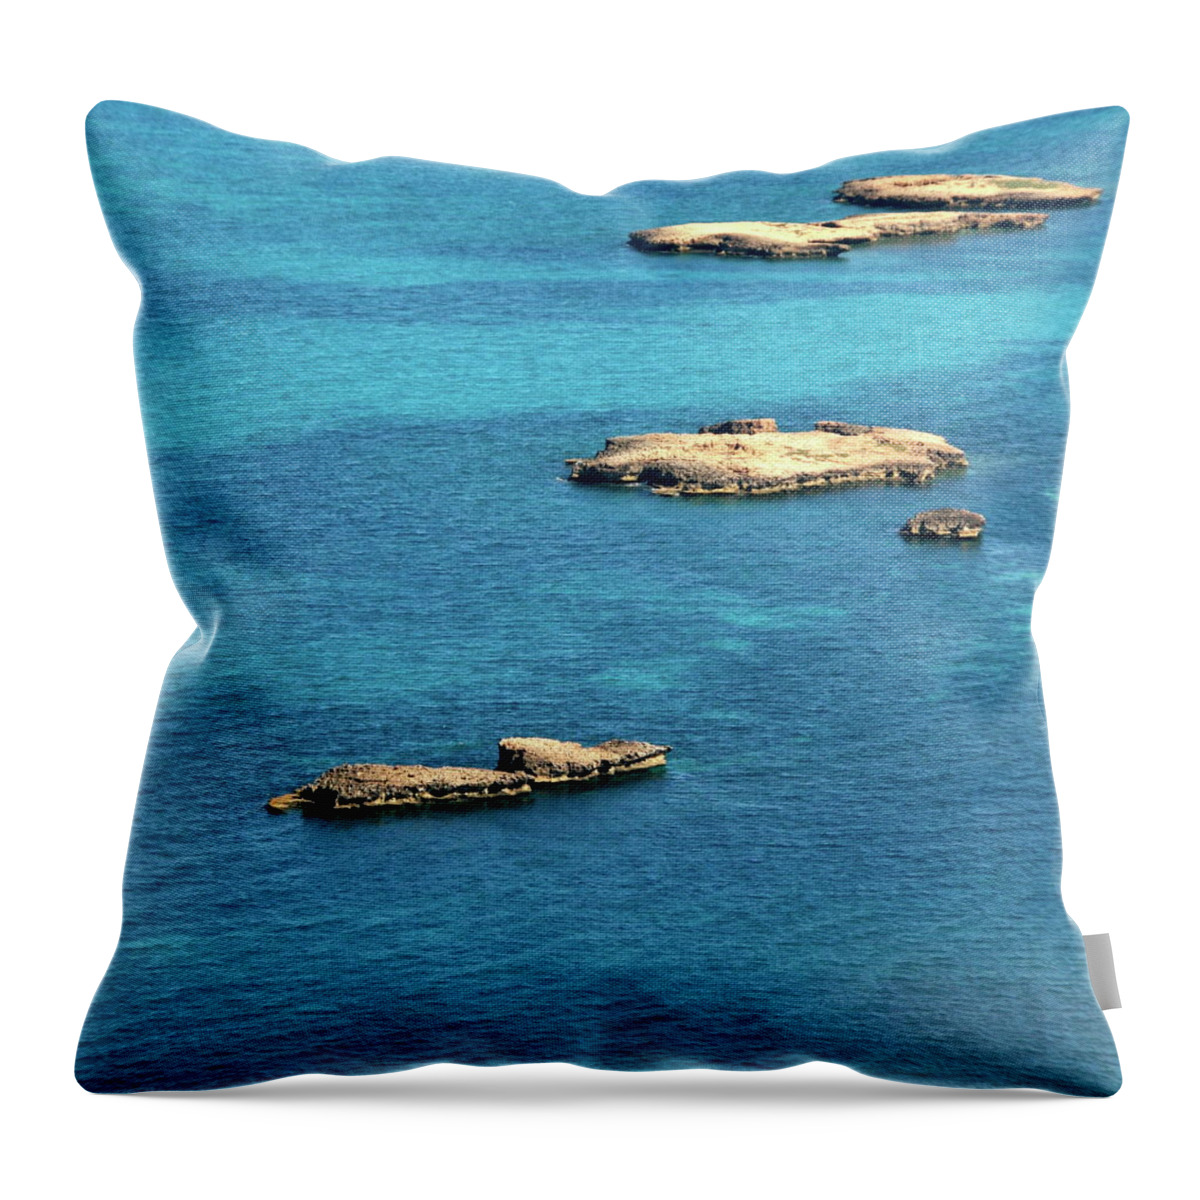 Outdoors Throw Pillow featuring the photograph Islets Islands by Judy Dunlop